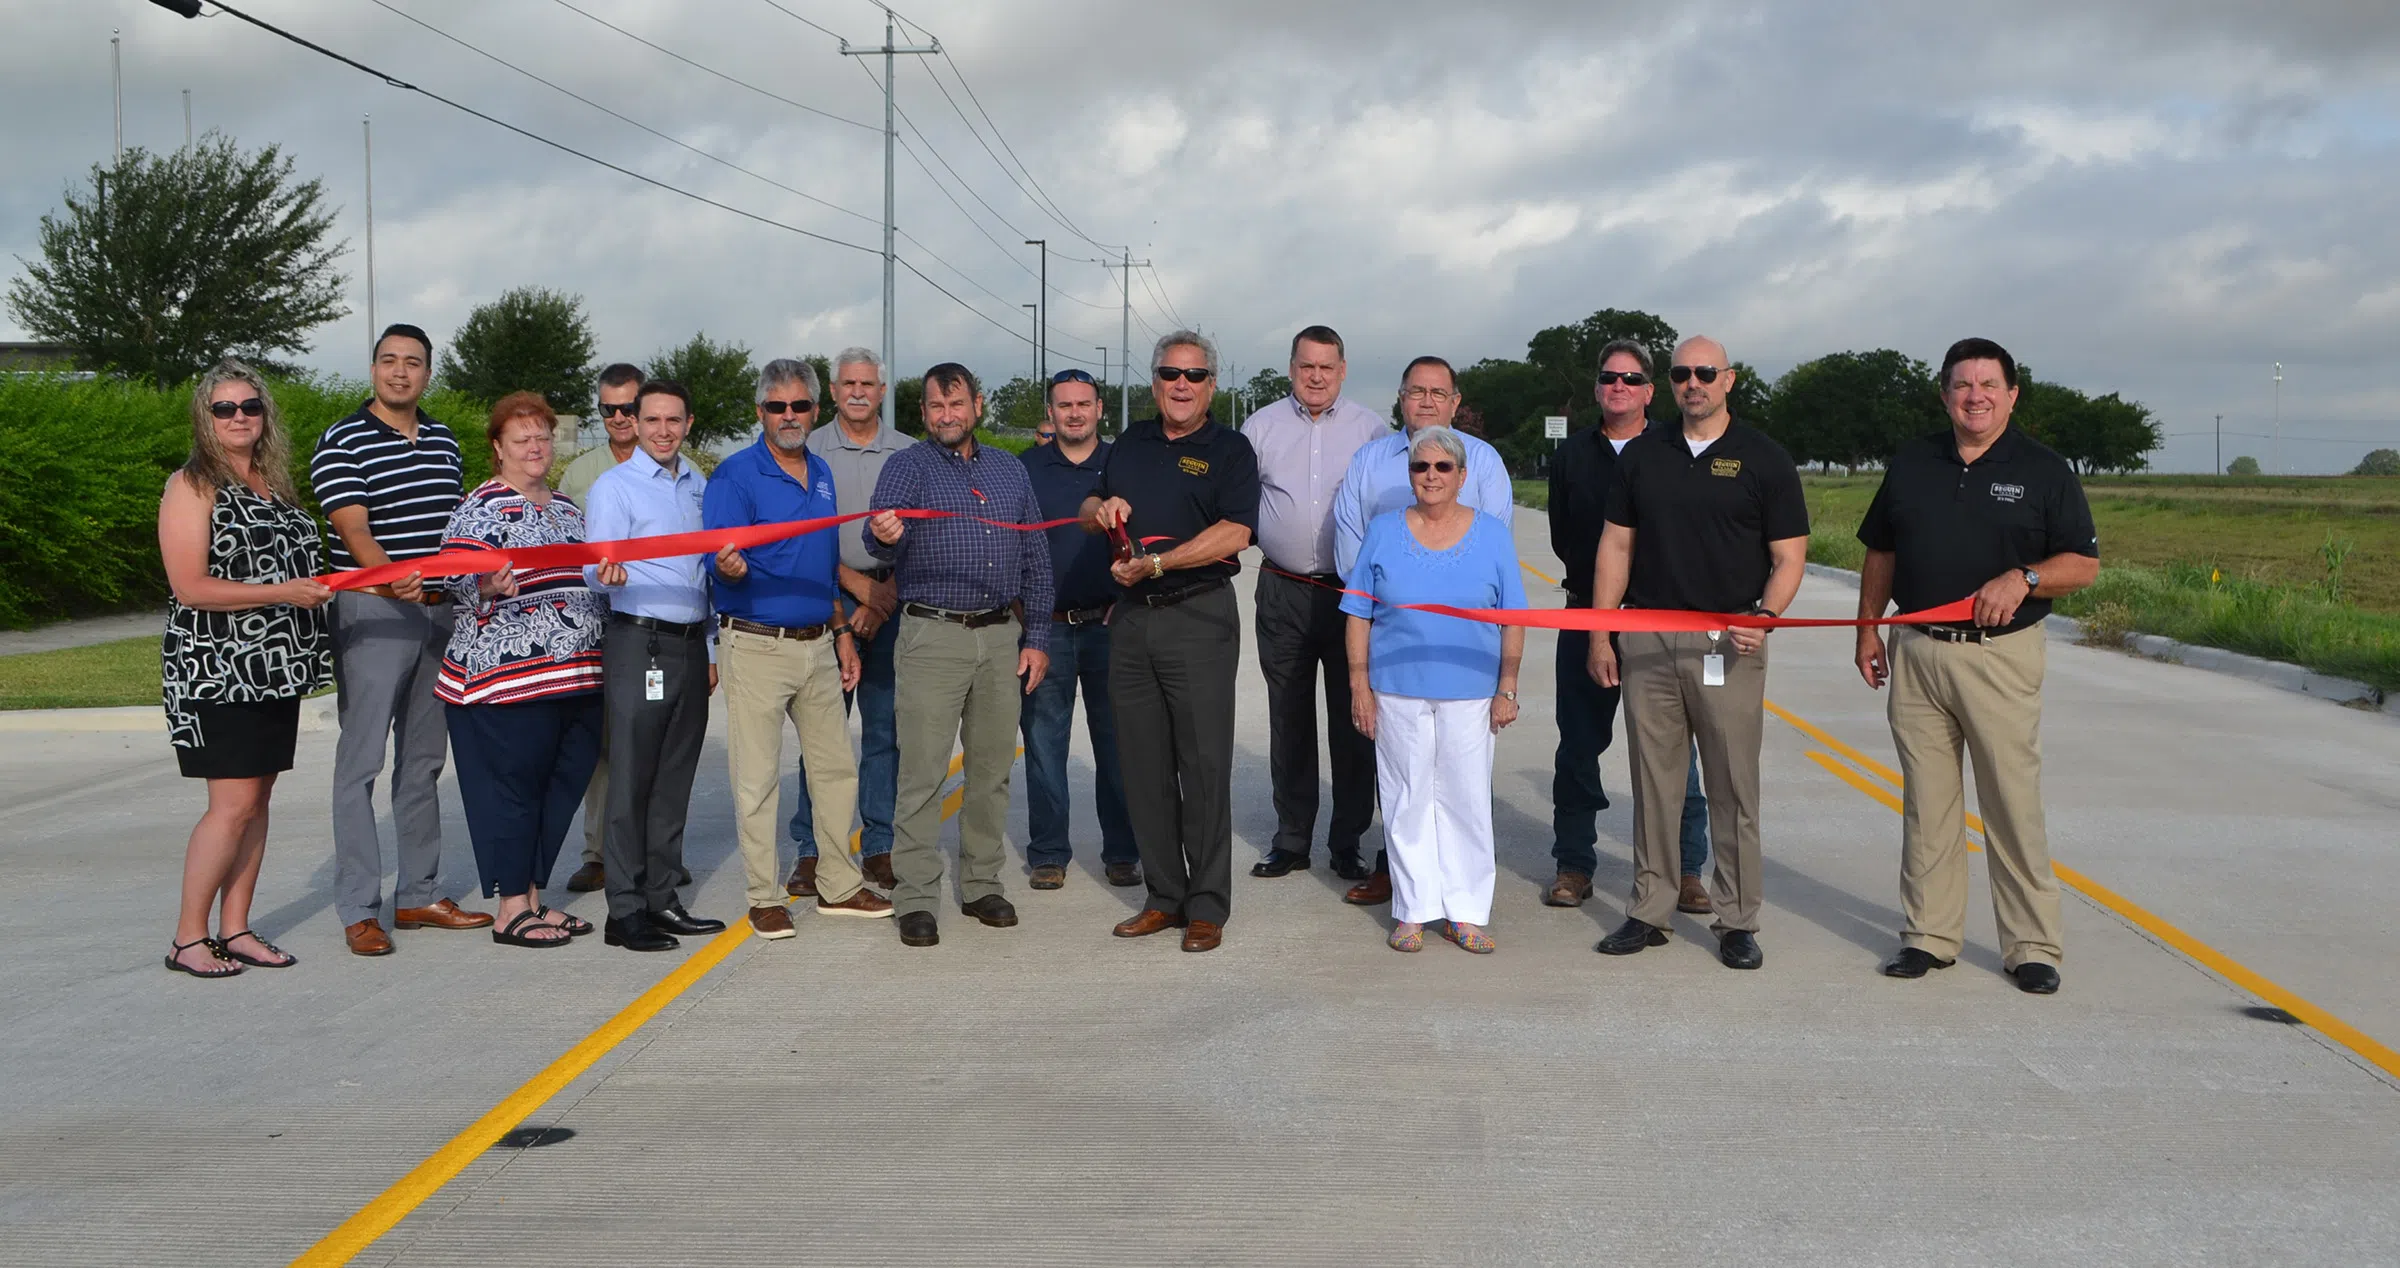 Ribbon Cutting Held to Mark Completion of Strempel Road Project